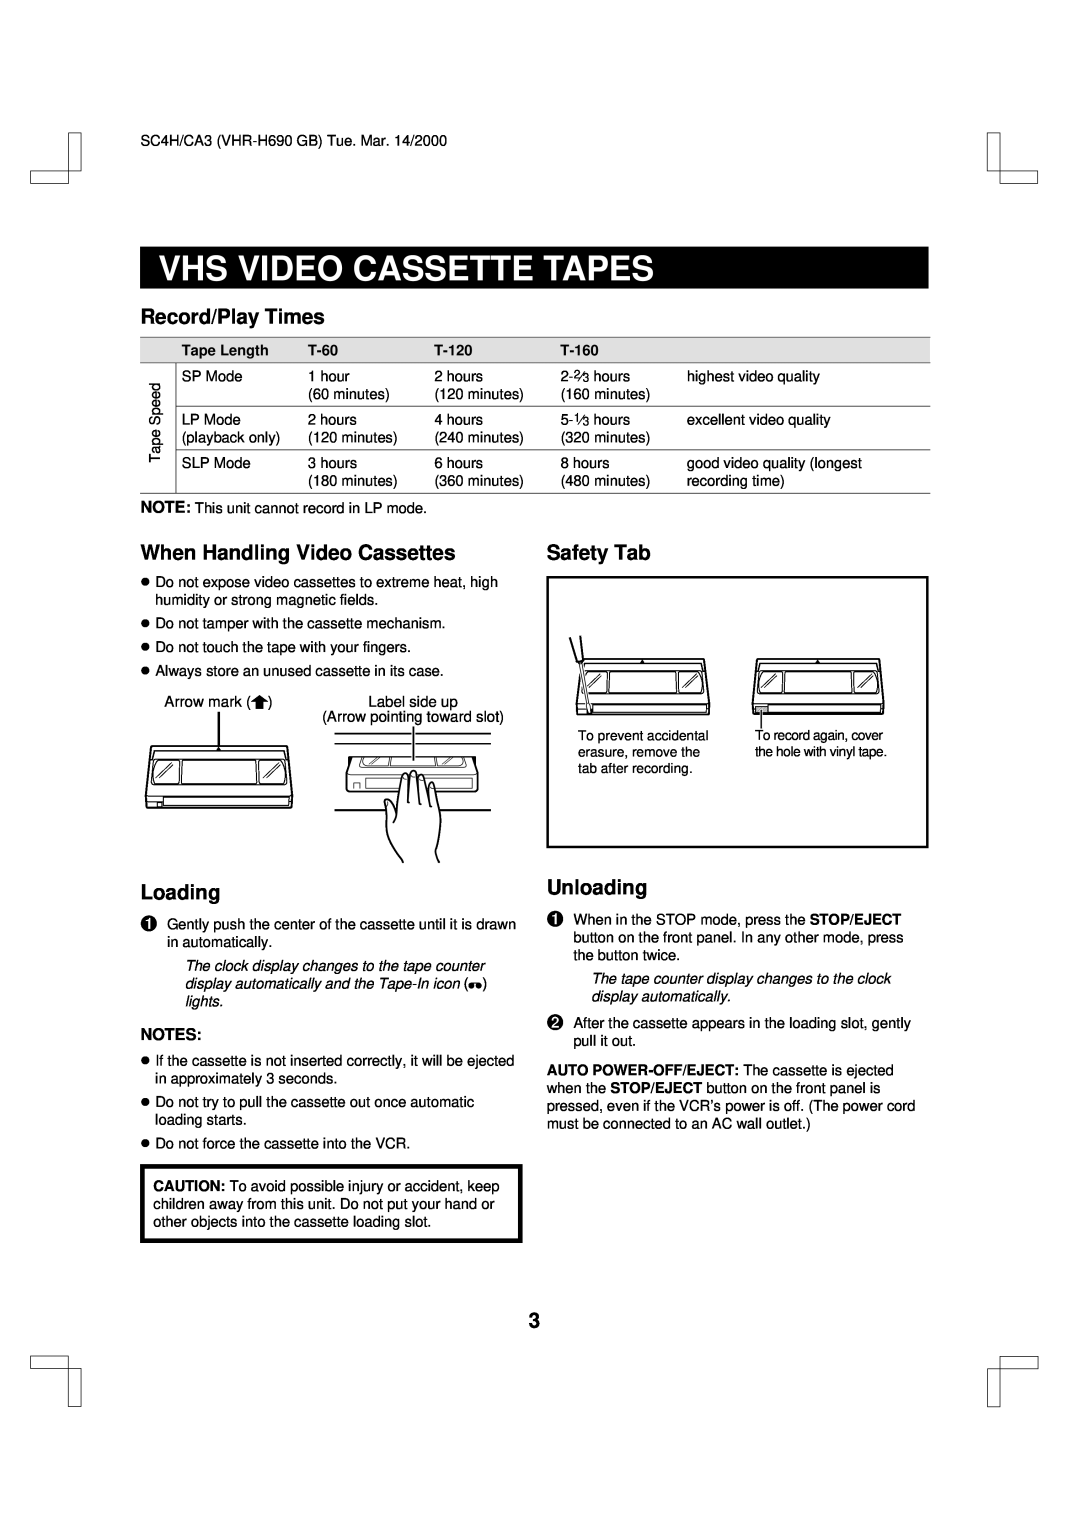 Sanyo VHR-H690 Vhs Video Cassette Tapes, Record/Play Times, When Handling Video Cassettes, Safety Tab, Loading, Unloading 